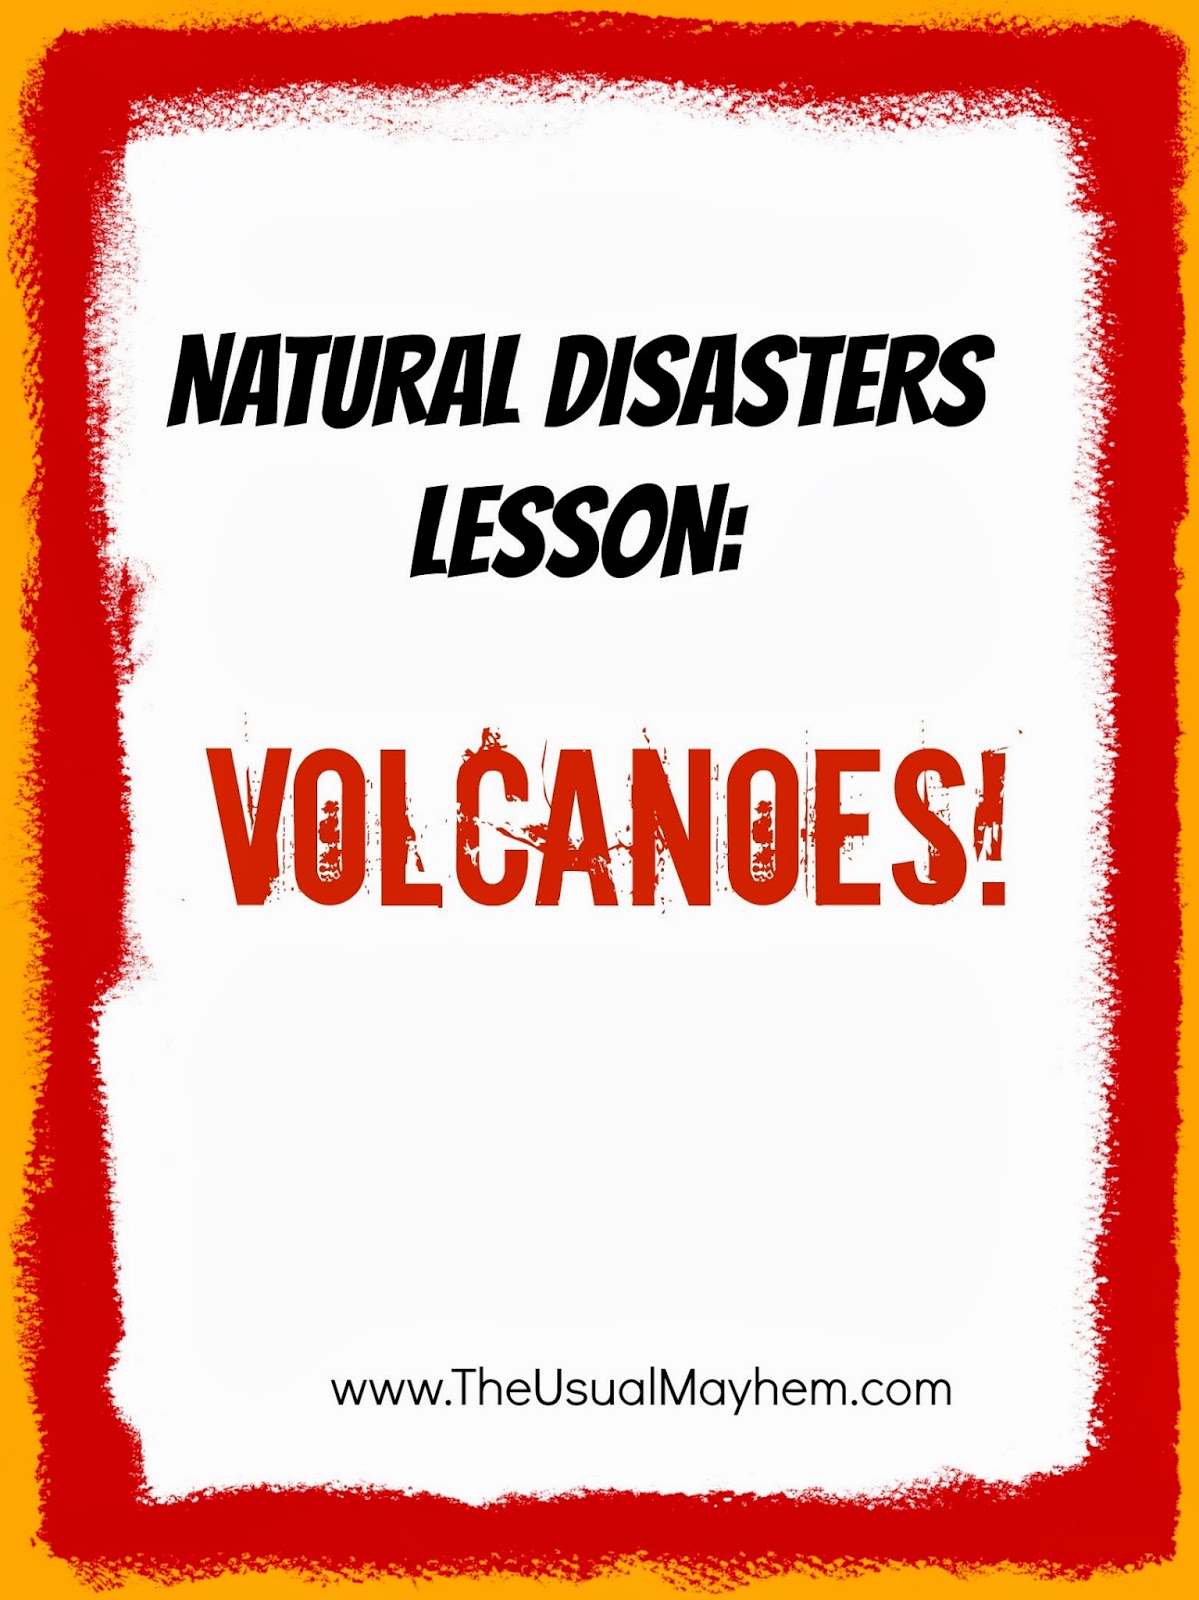 Lessons from Recent Disasters and the Development